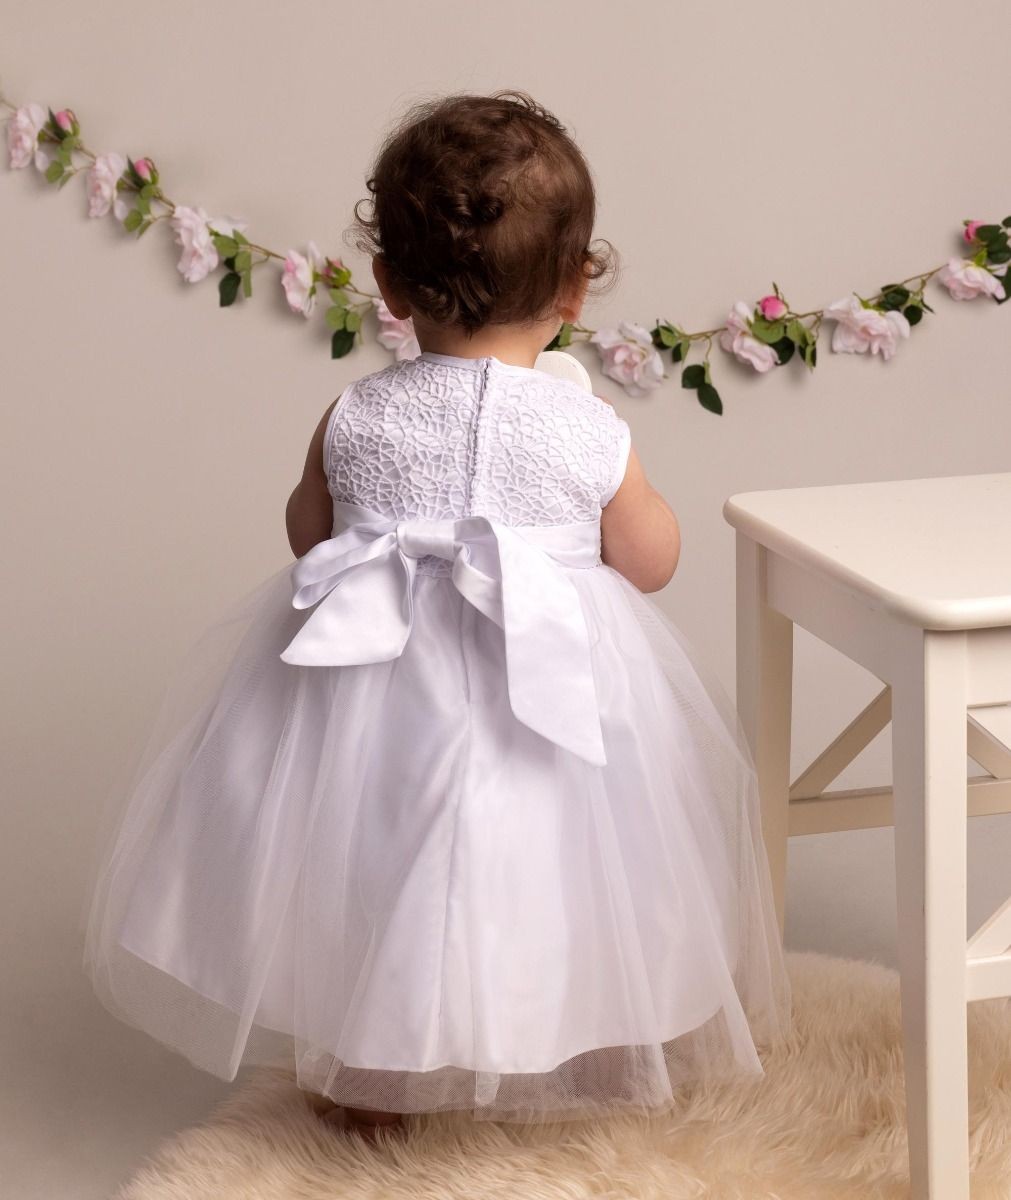 Baby Girls Christening Dress with Lace & Bow - ROSE - White